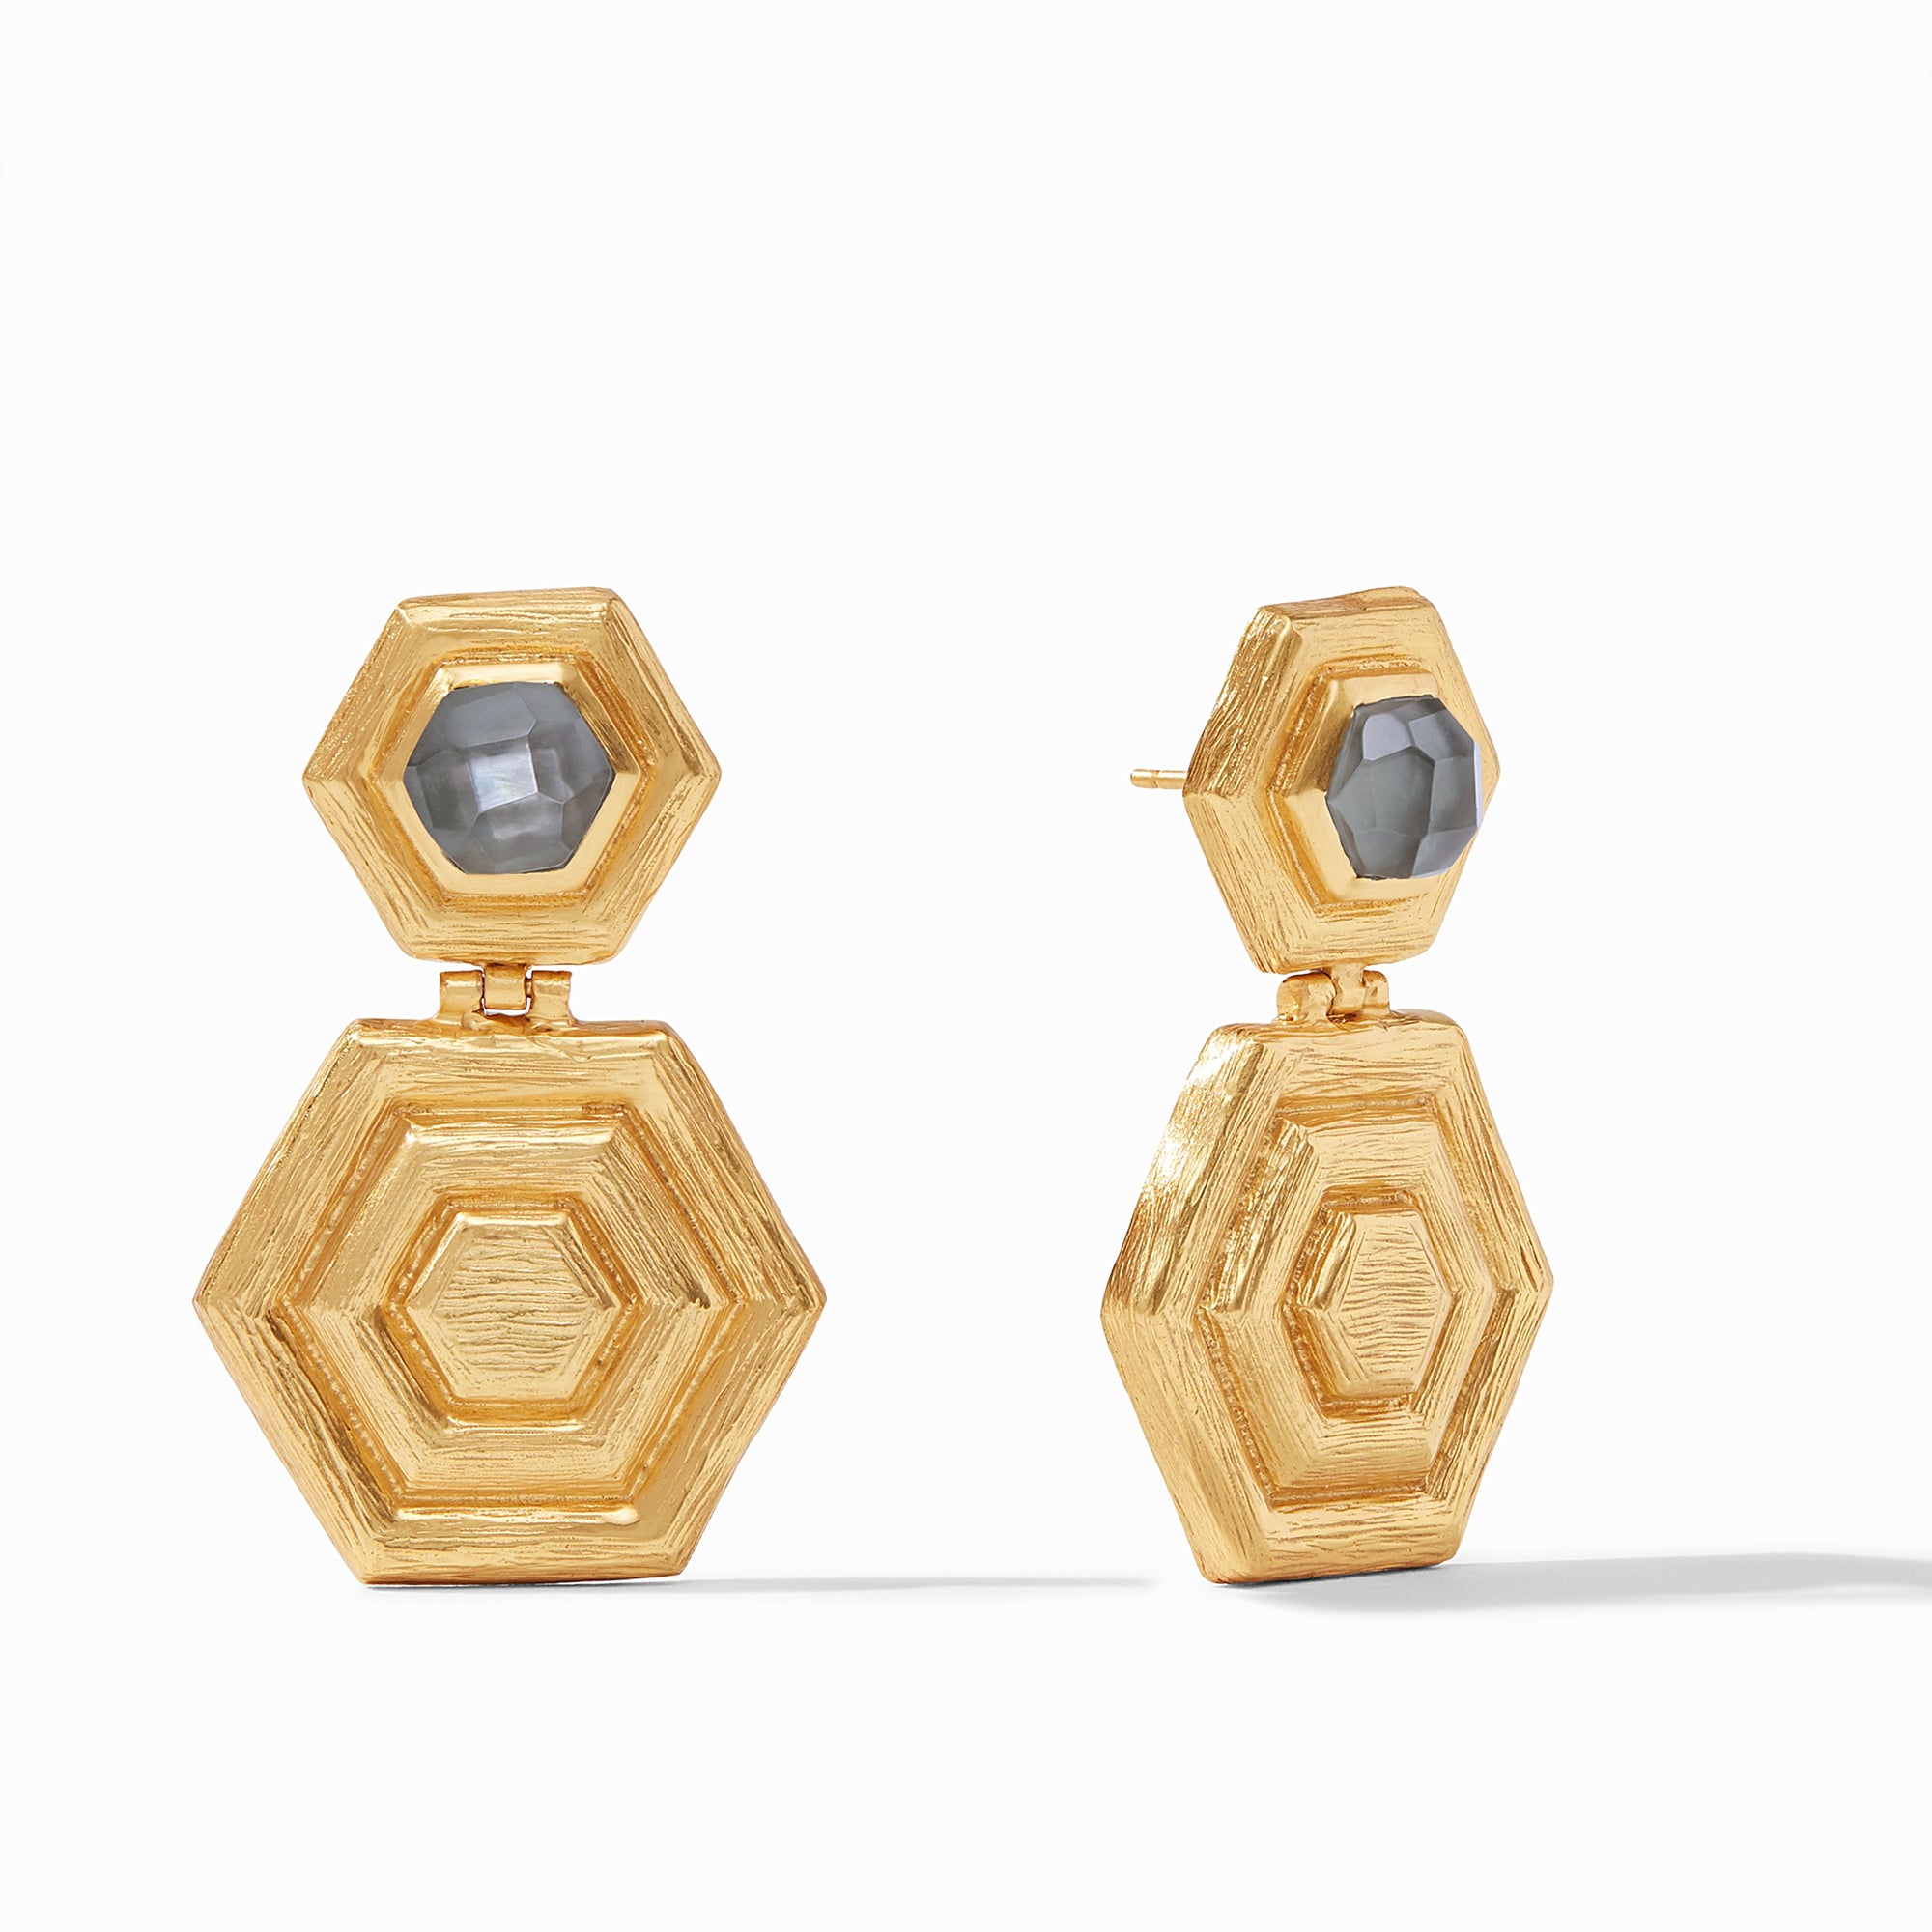 Julie Vos Palladio Stone Statement Earring in Iridescent Charcoal Blue option, charcoal blue, fall 2021, new arrivals, palladio collection, holiday hues, winter edit